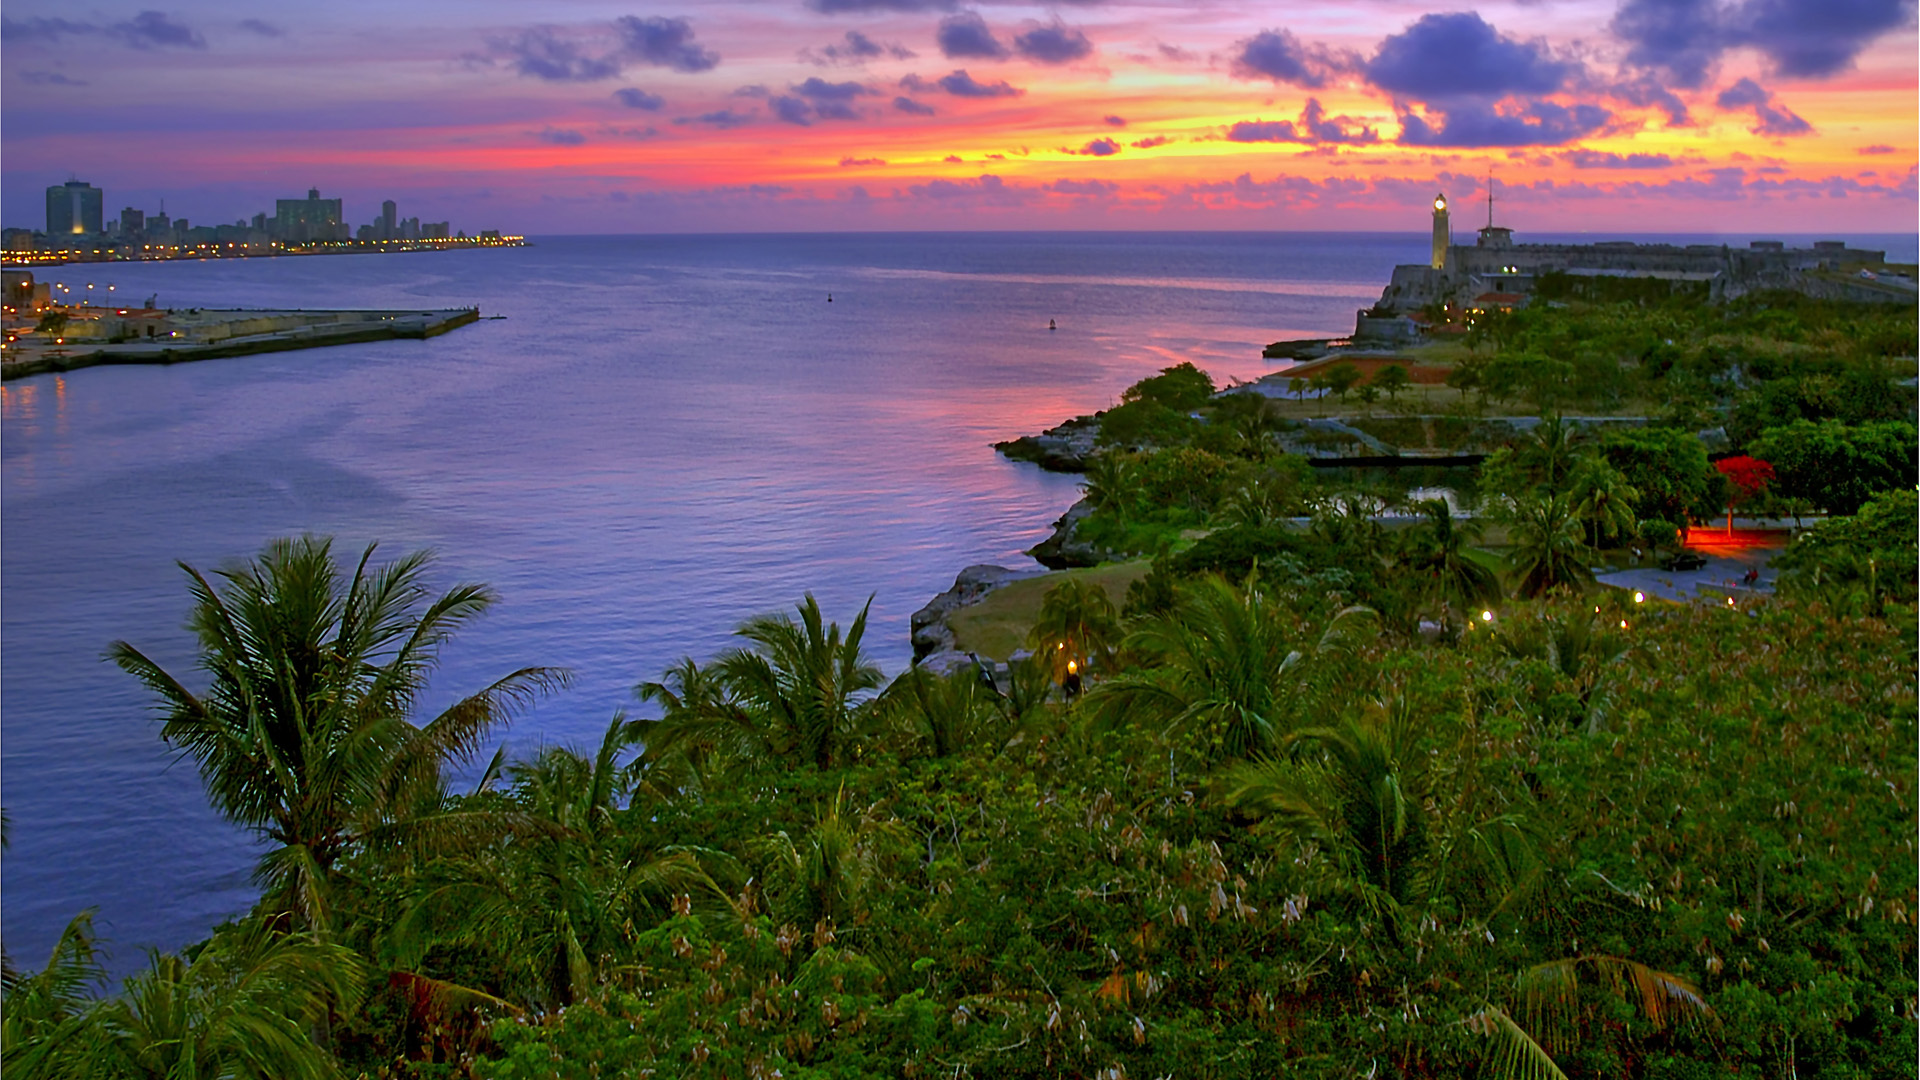 Cuba. Morro Castle and entrance to Havana Bay, seen from the La Cabaña at dusk. Beautiful tropical garden in the foreground.